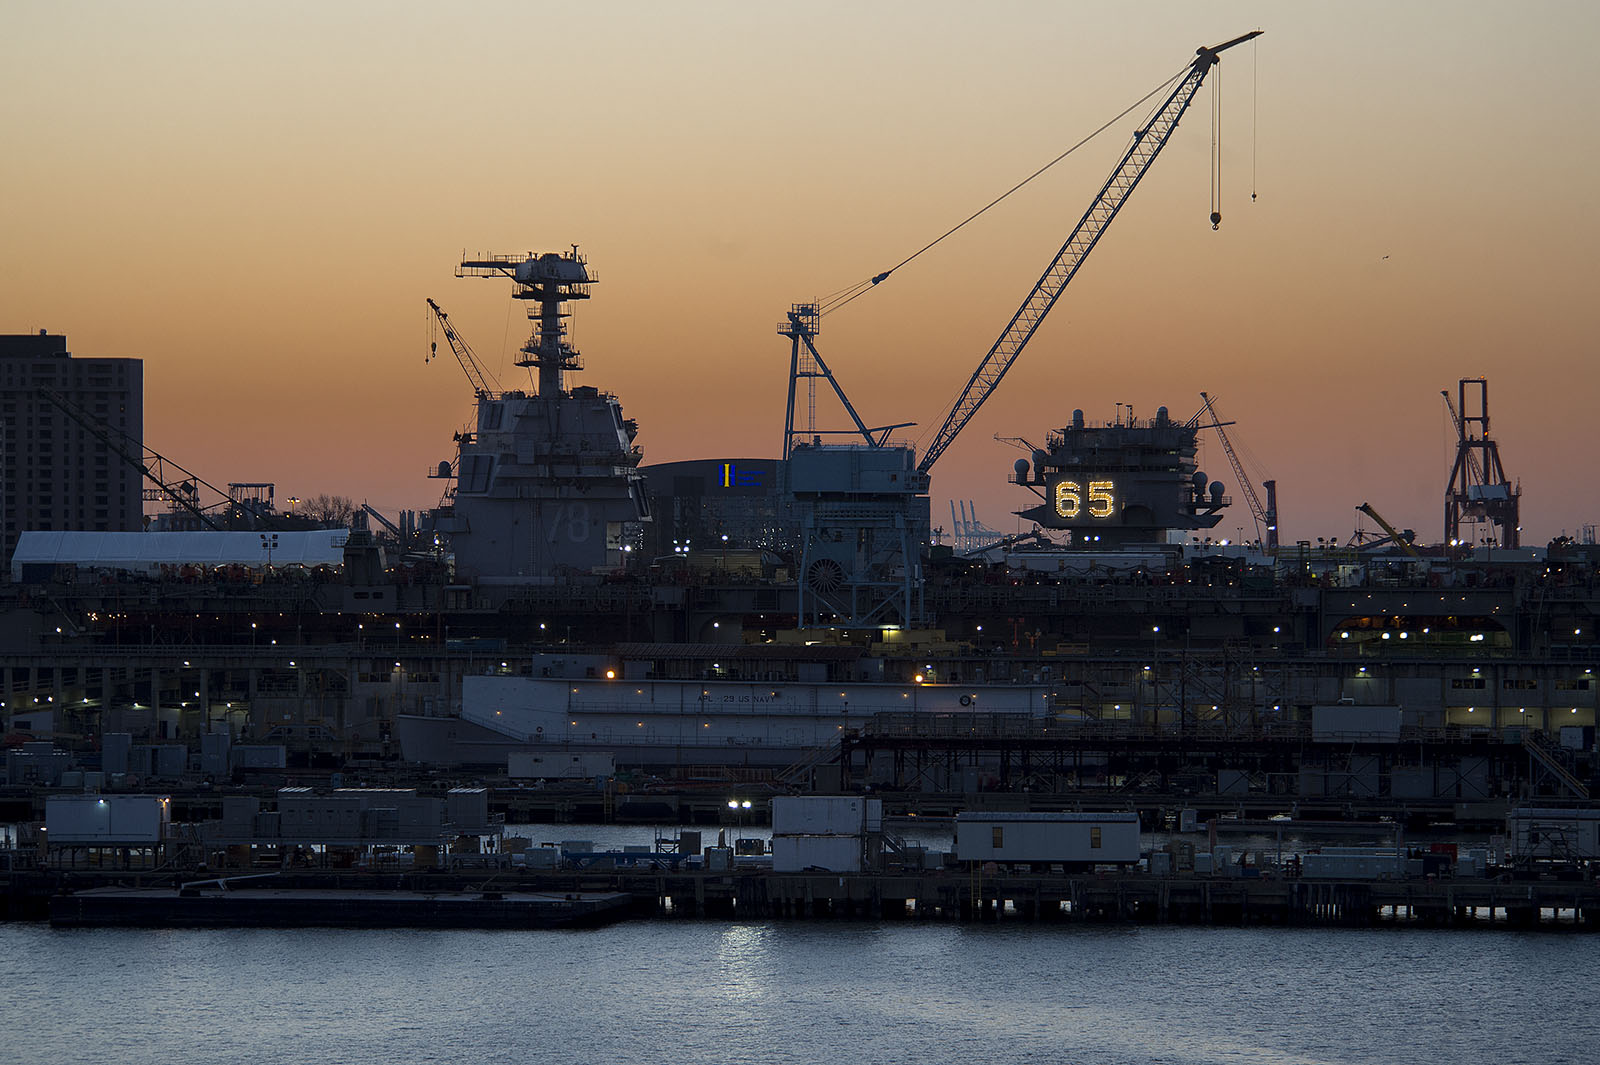 Thw aircraft carrier Gerald R Ford (CVN-78) and Enterprise (CVN-65) sit side by side in the South Yard as the sunrise starts to light up the sky. HII Photo